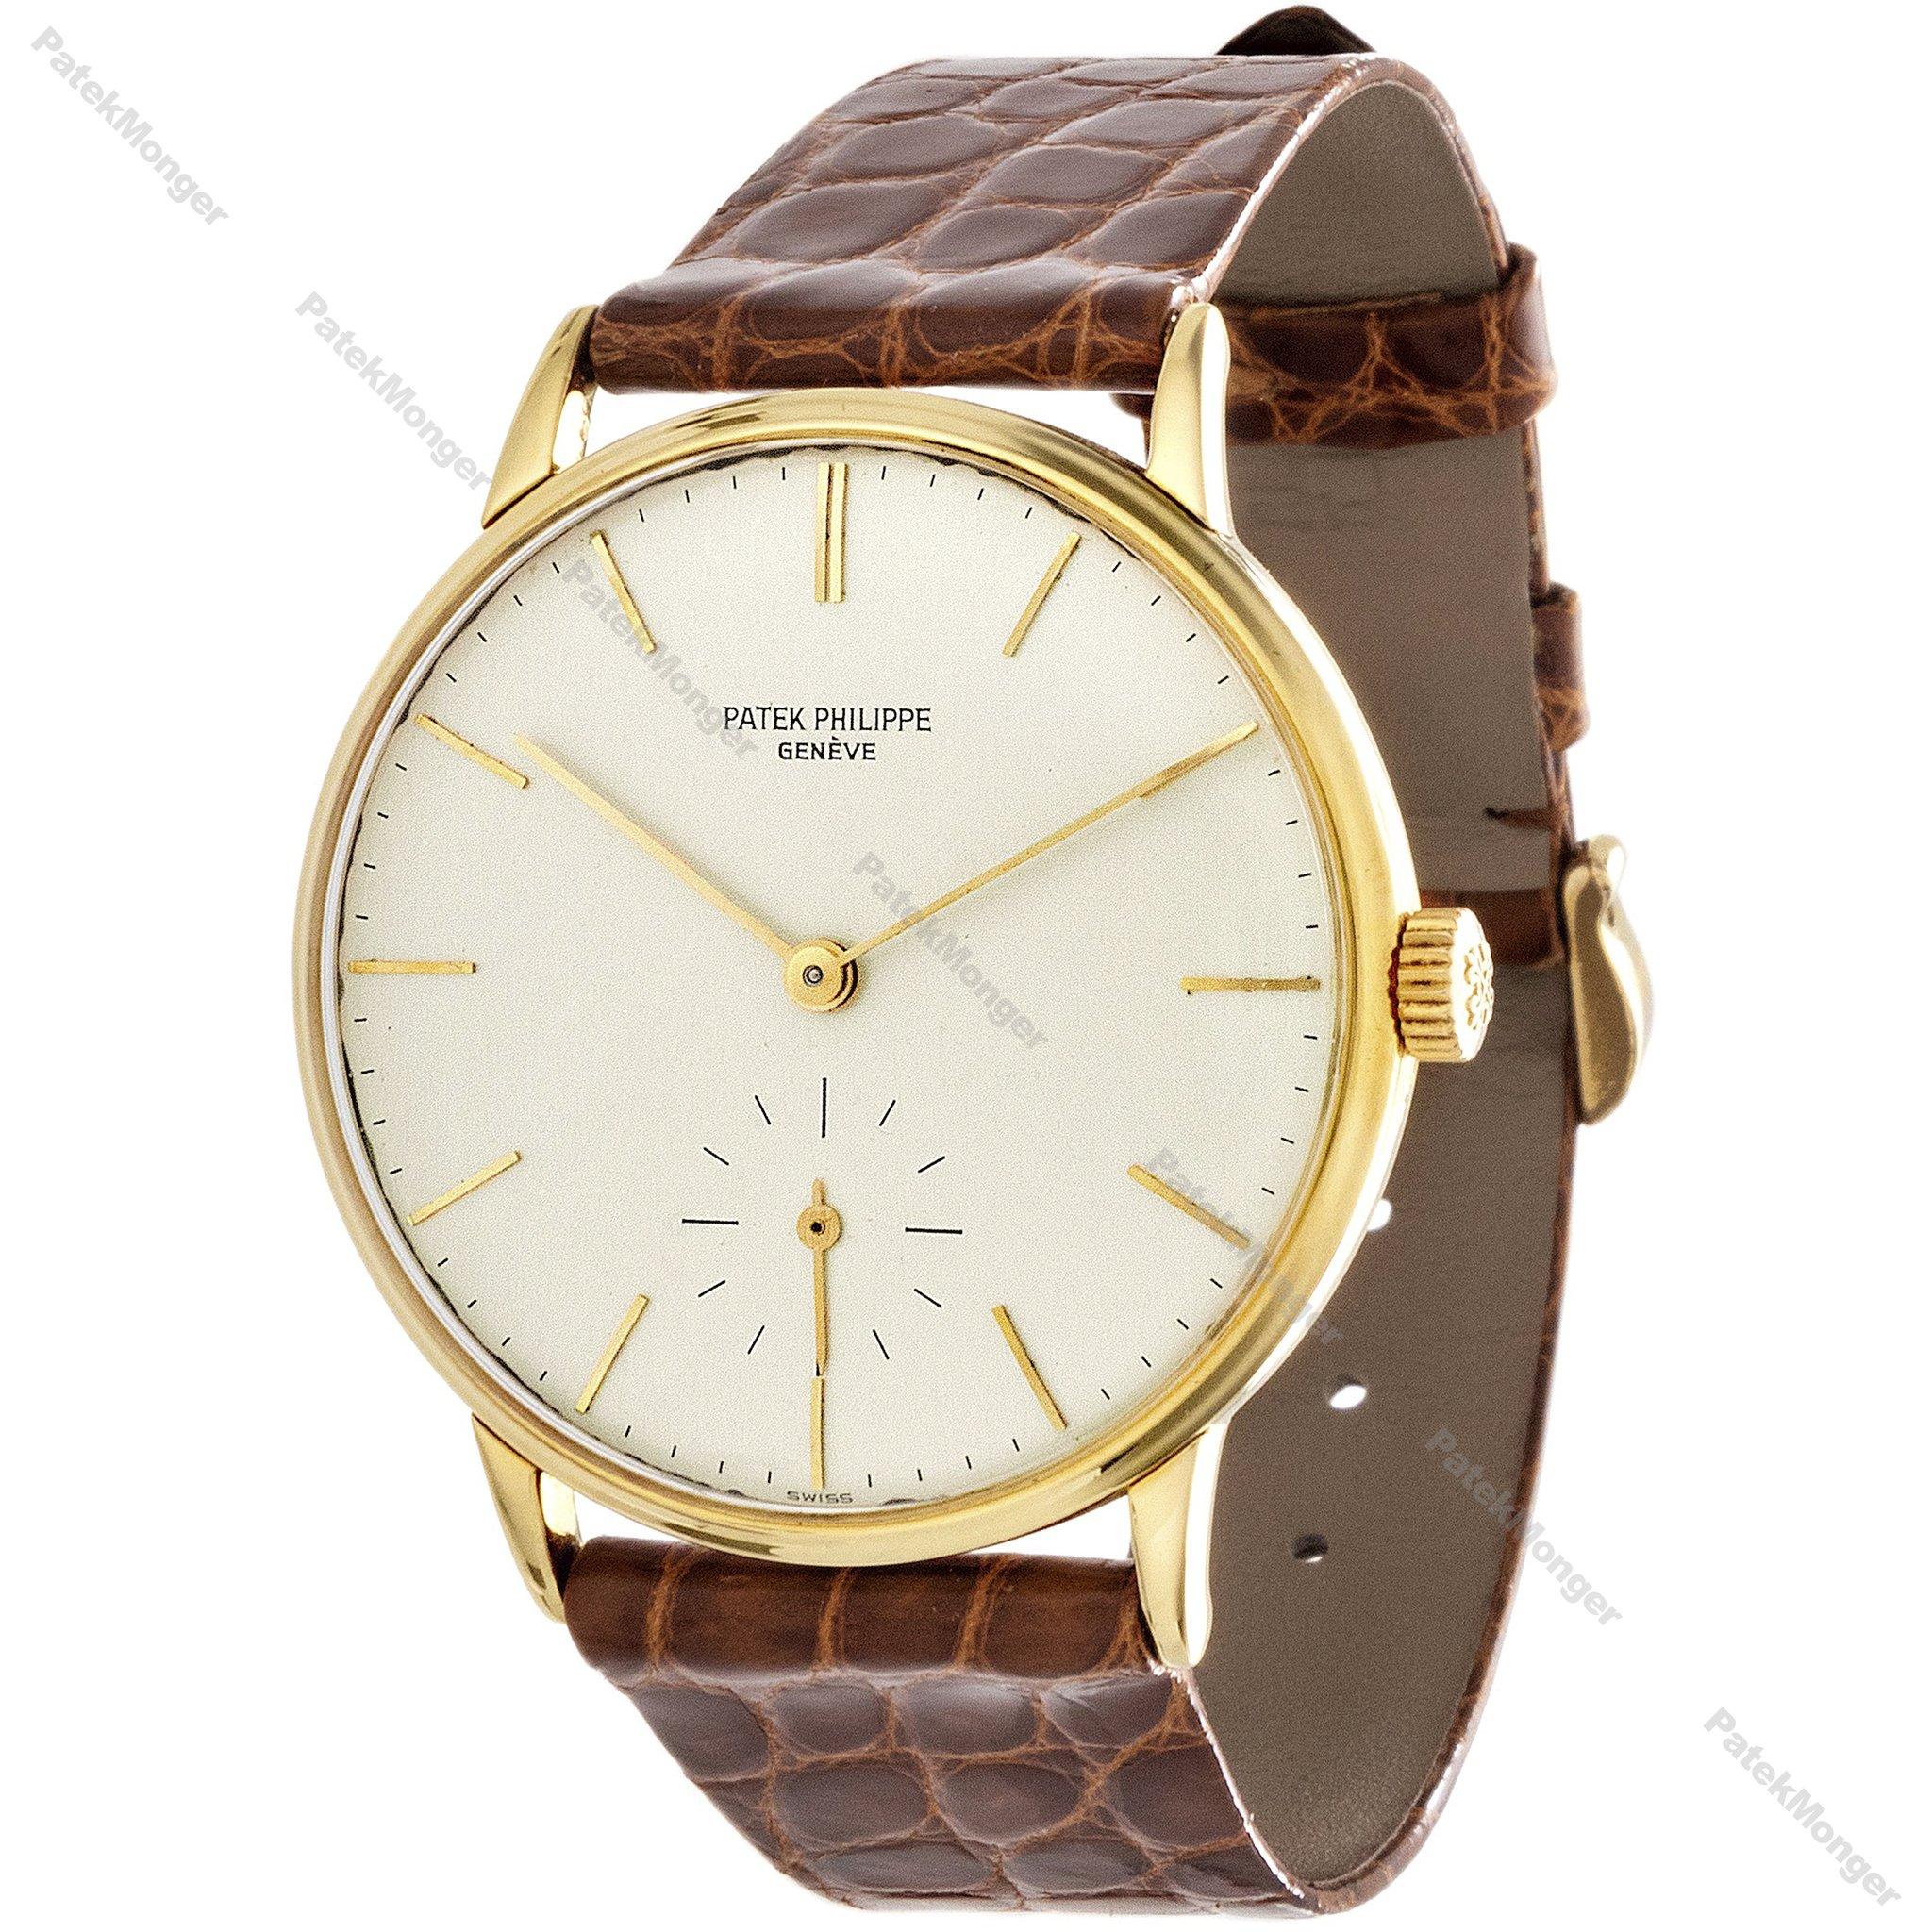 Introduction:
This Patek Philippe 3410J vintage Calatrava watch is made in 18K yellow gold, measuring 35 mm in diameter, and fitted with a 27 AM 400 